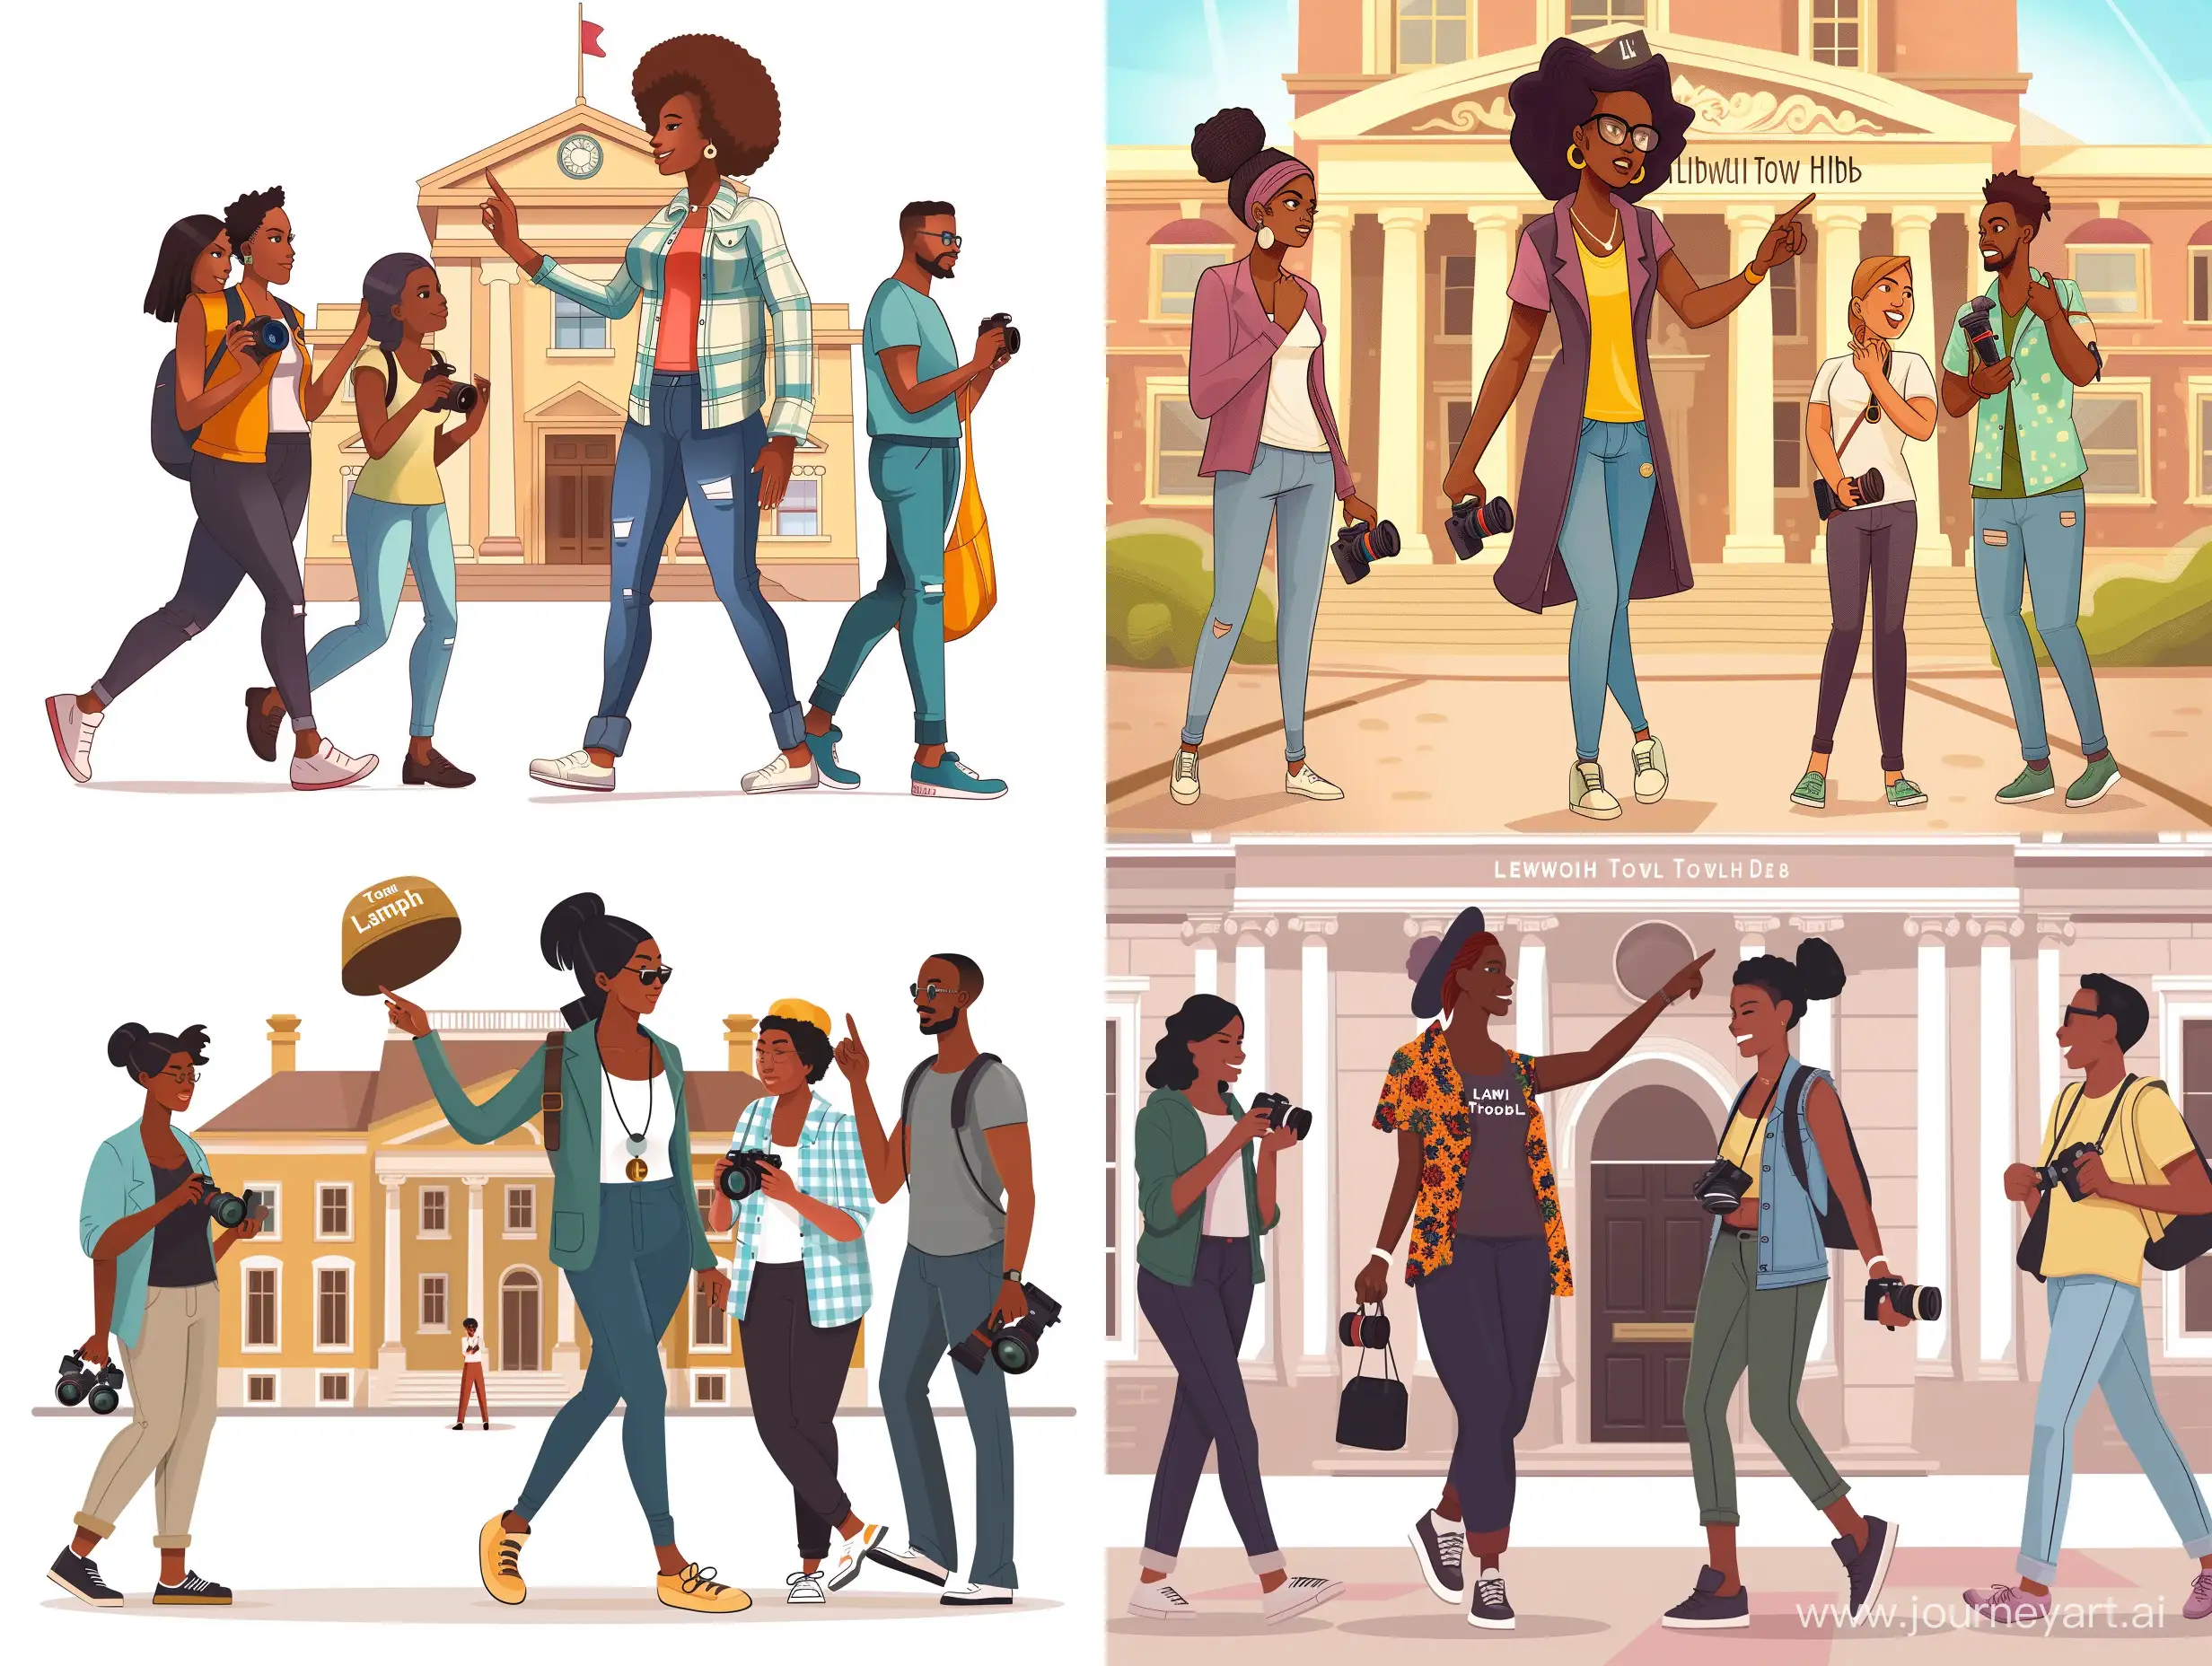 Colorful-Cartoon-Style-Black-Woman-Tour-Guide-Leading-Group-at-Lambeth-Town-Hall